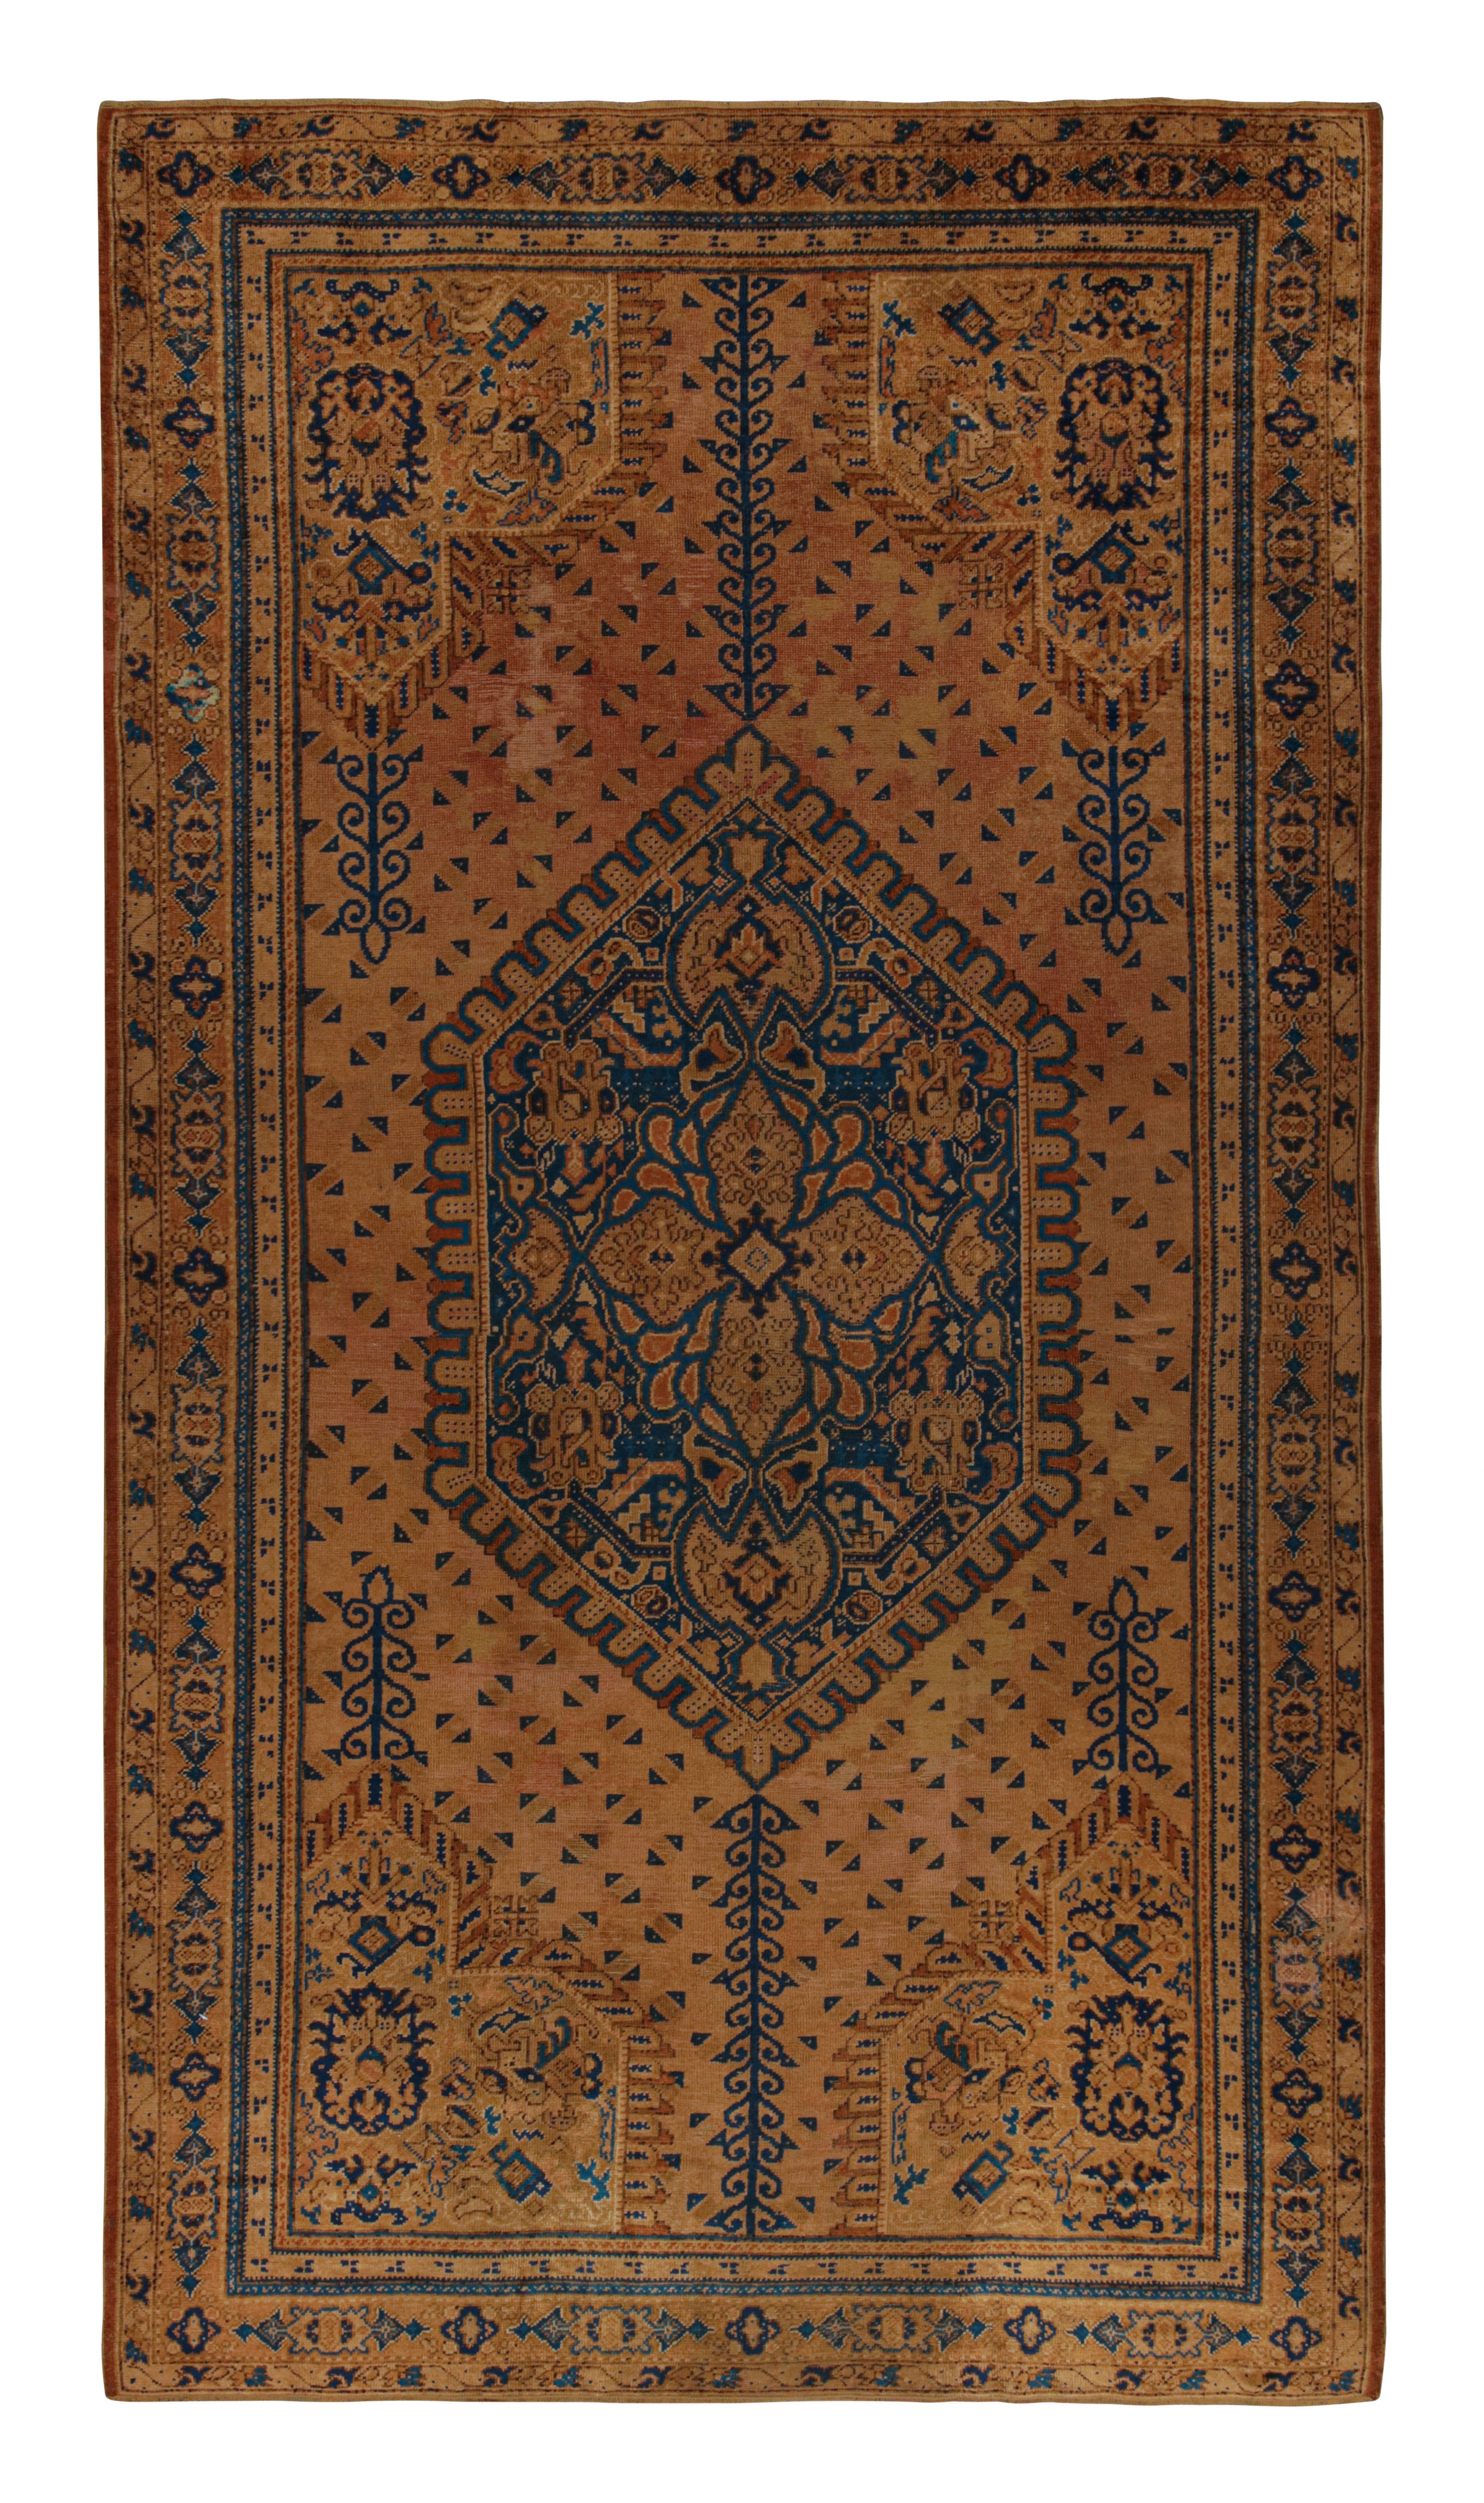 Oversized Antique European Rug in Brown with Blue Medallion, from Rug & Kilim